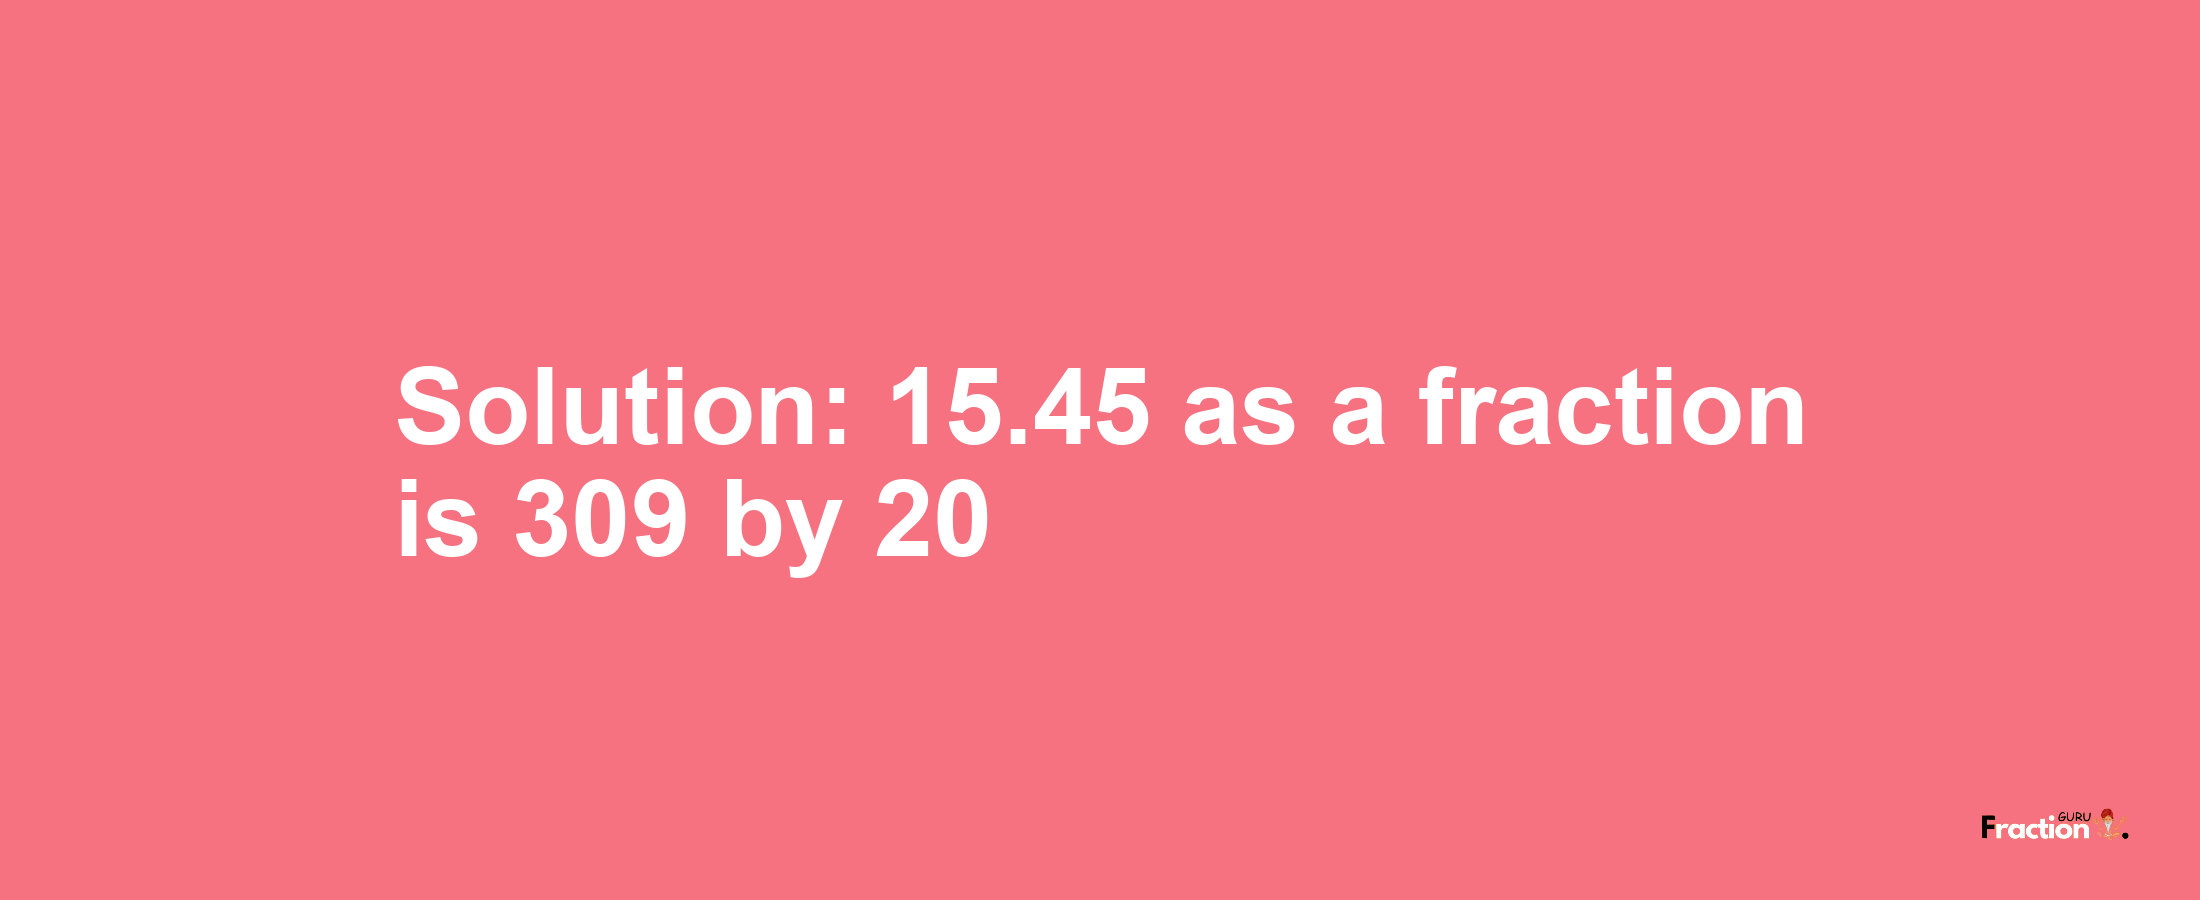 Solution:15.45 as a fraction is 309/20